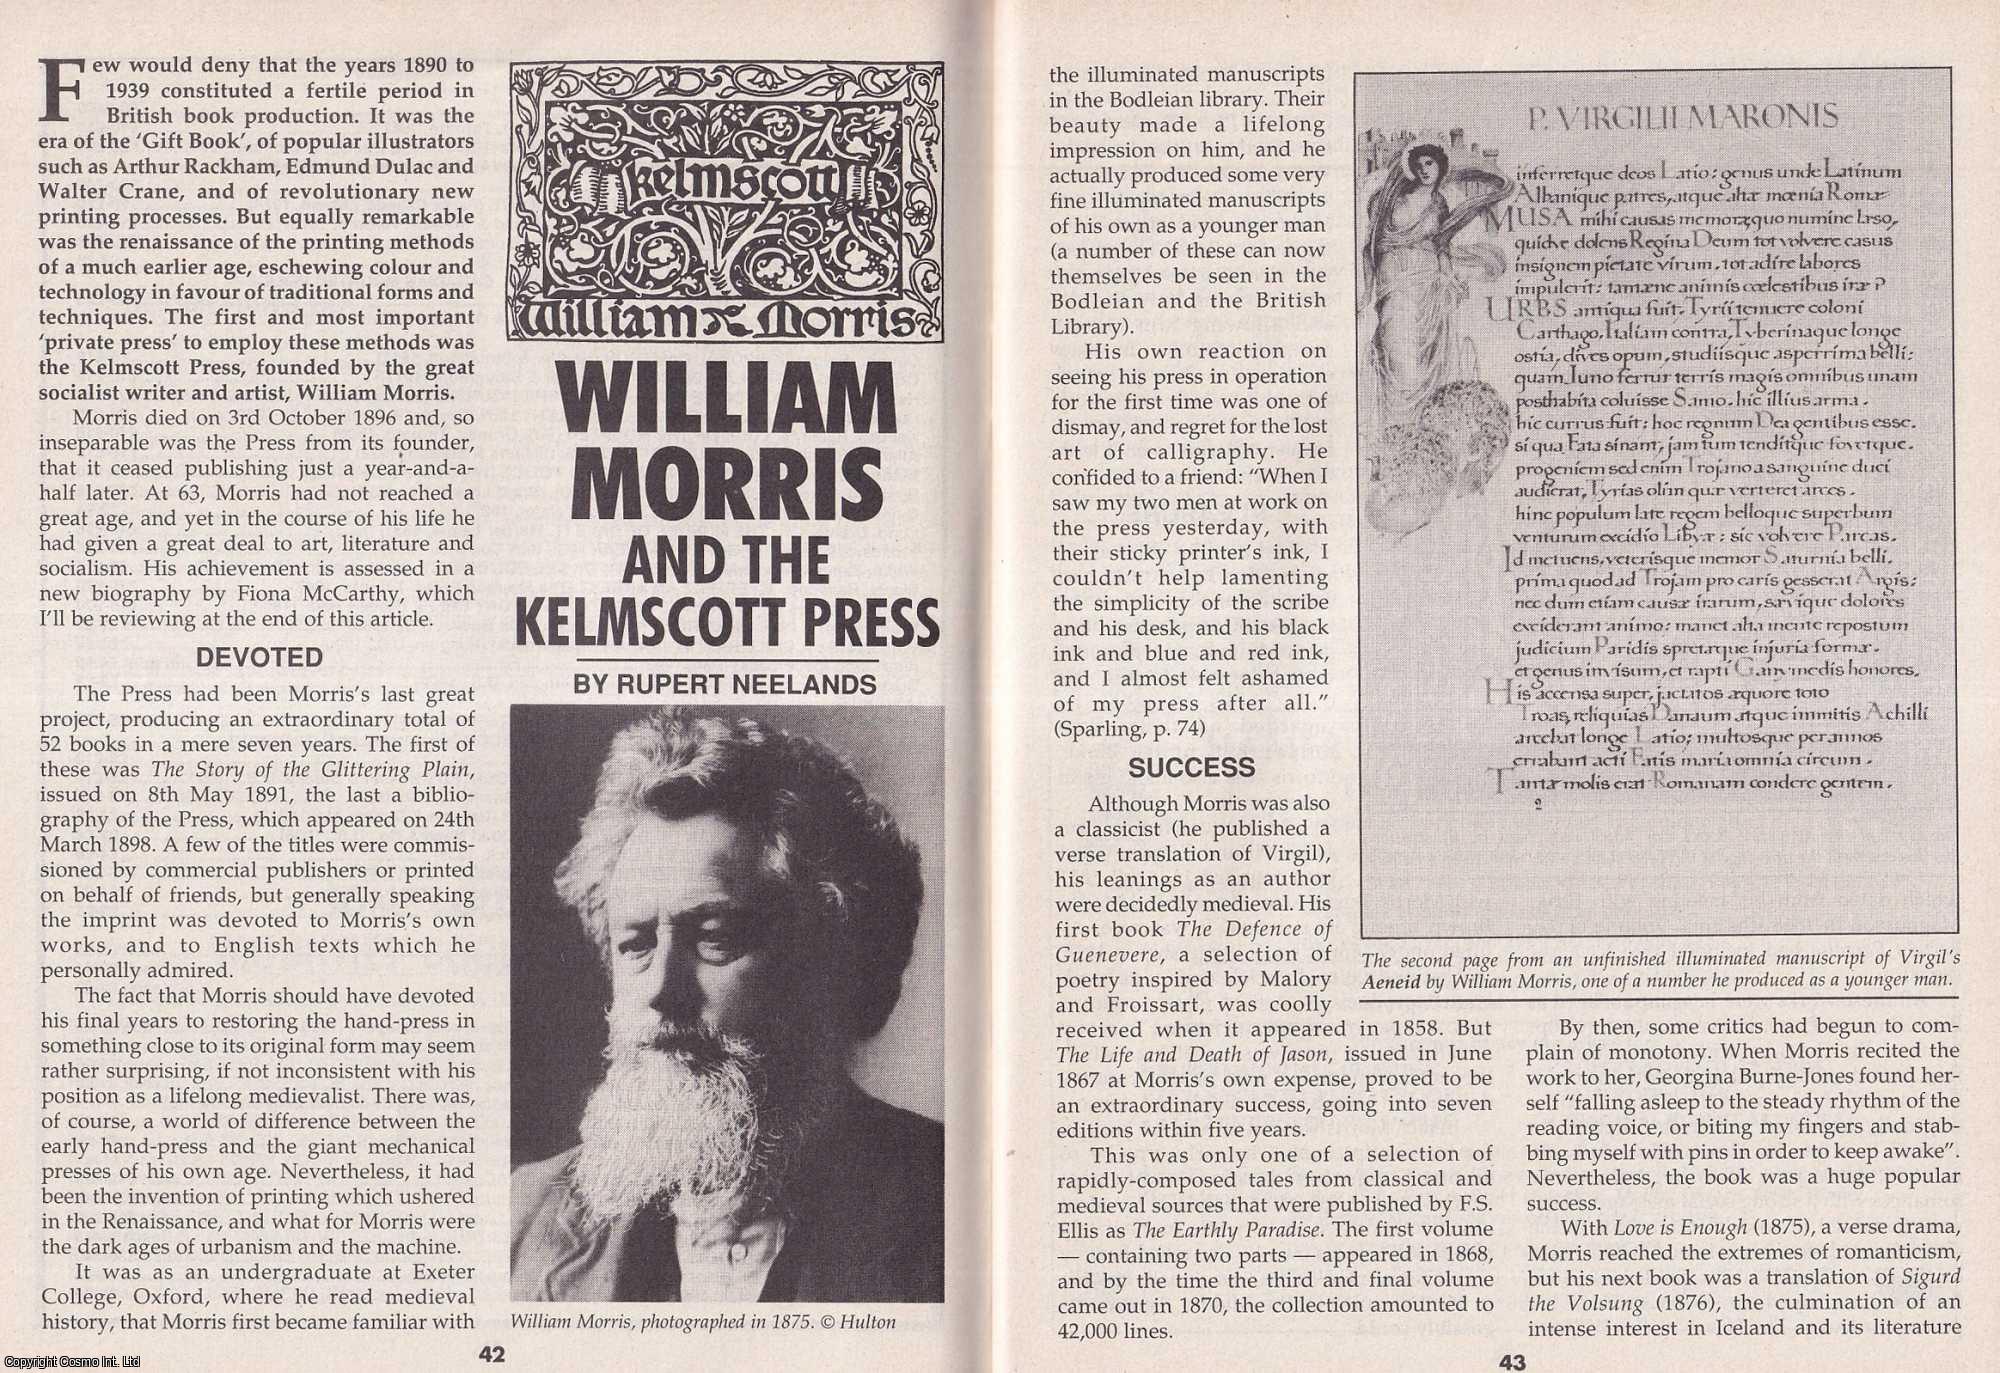 Rupert Neelands - William Morris and The Kelmscott Press. This is an original article separated from an issue of The Book & Magazine Collector publication.